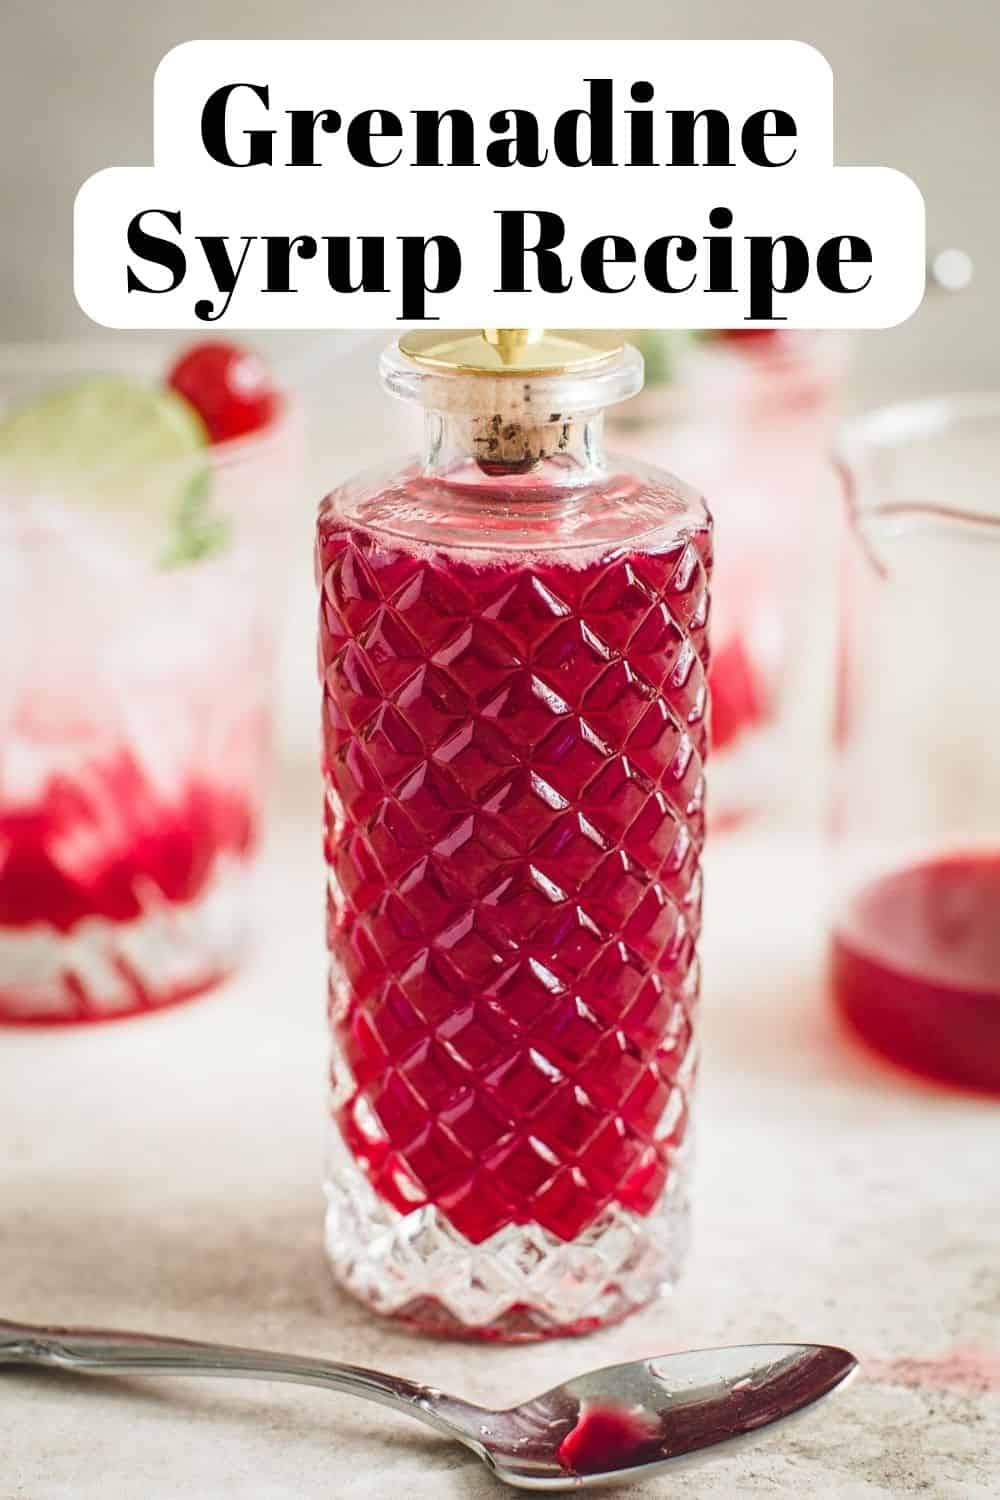 Grenadine syrup recipe in a bottle.